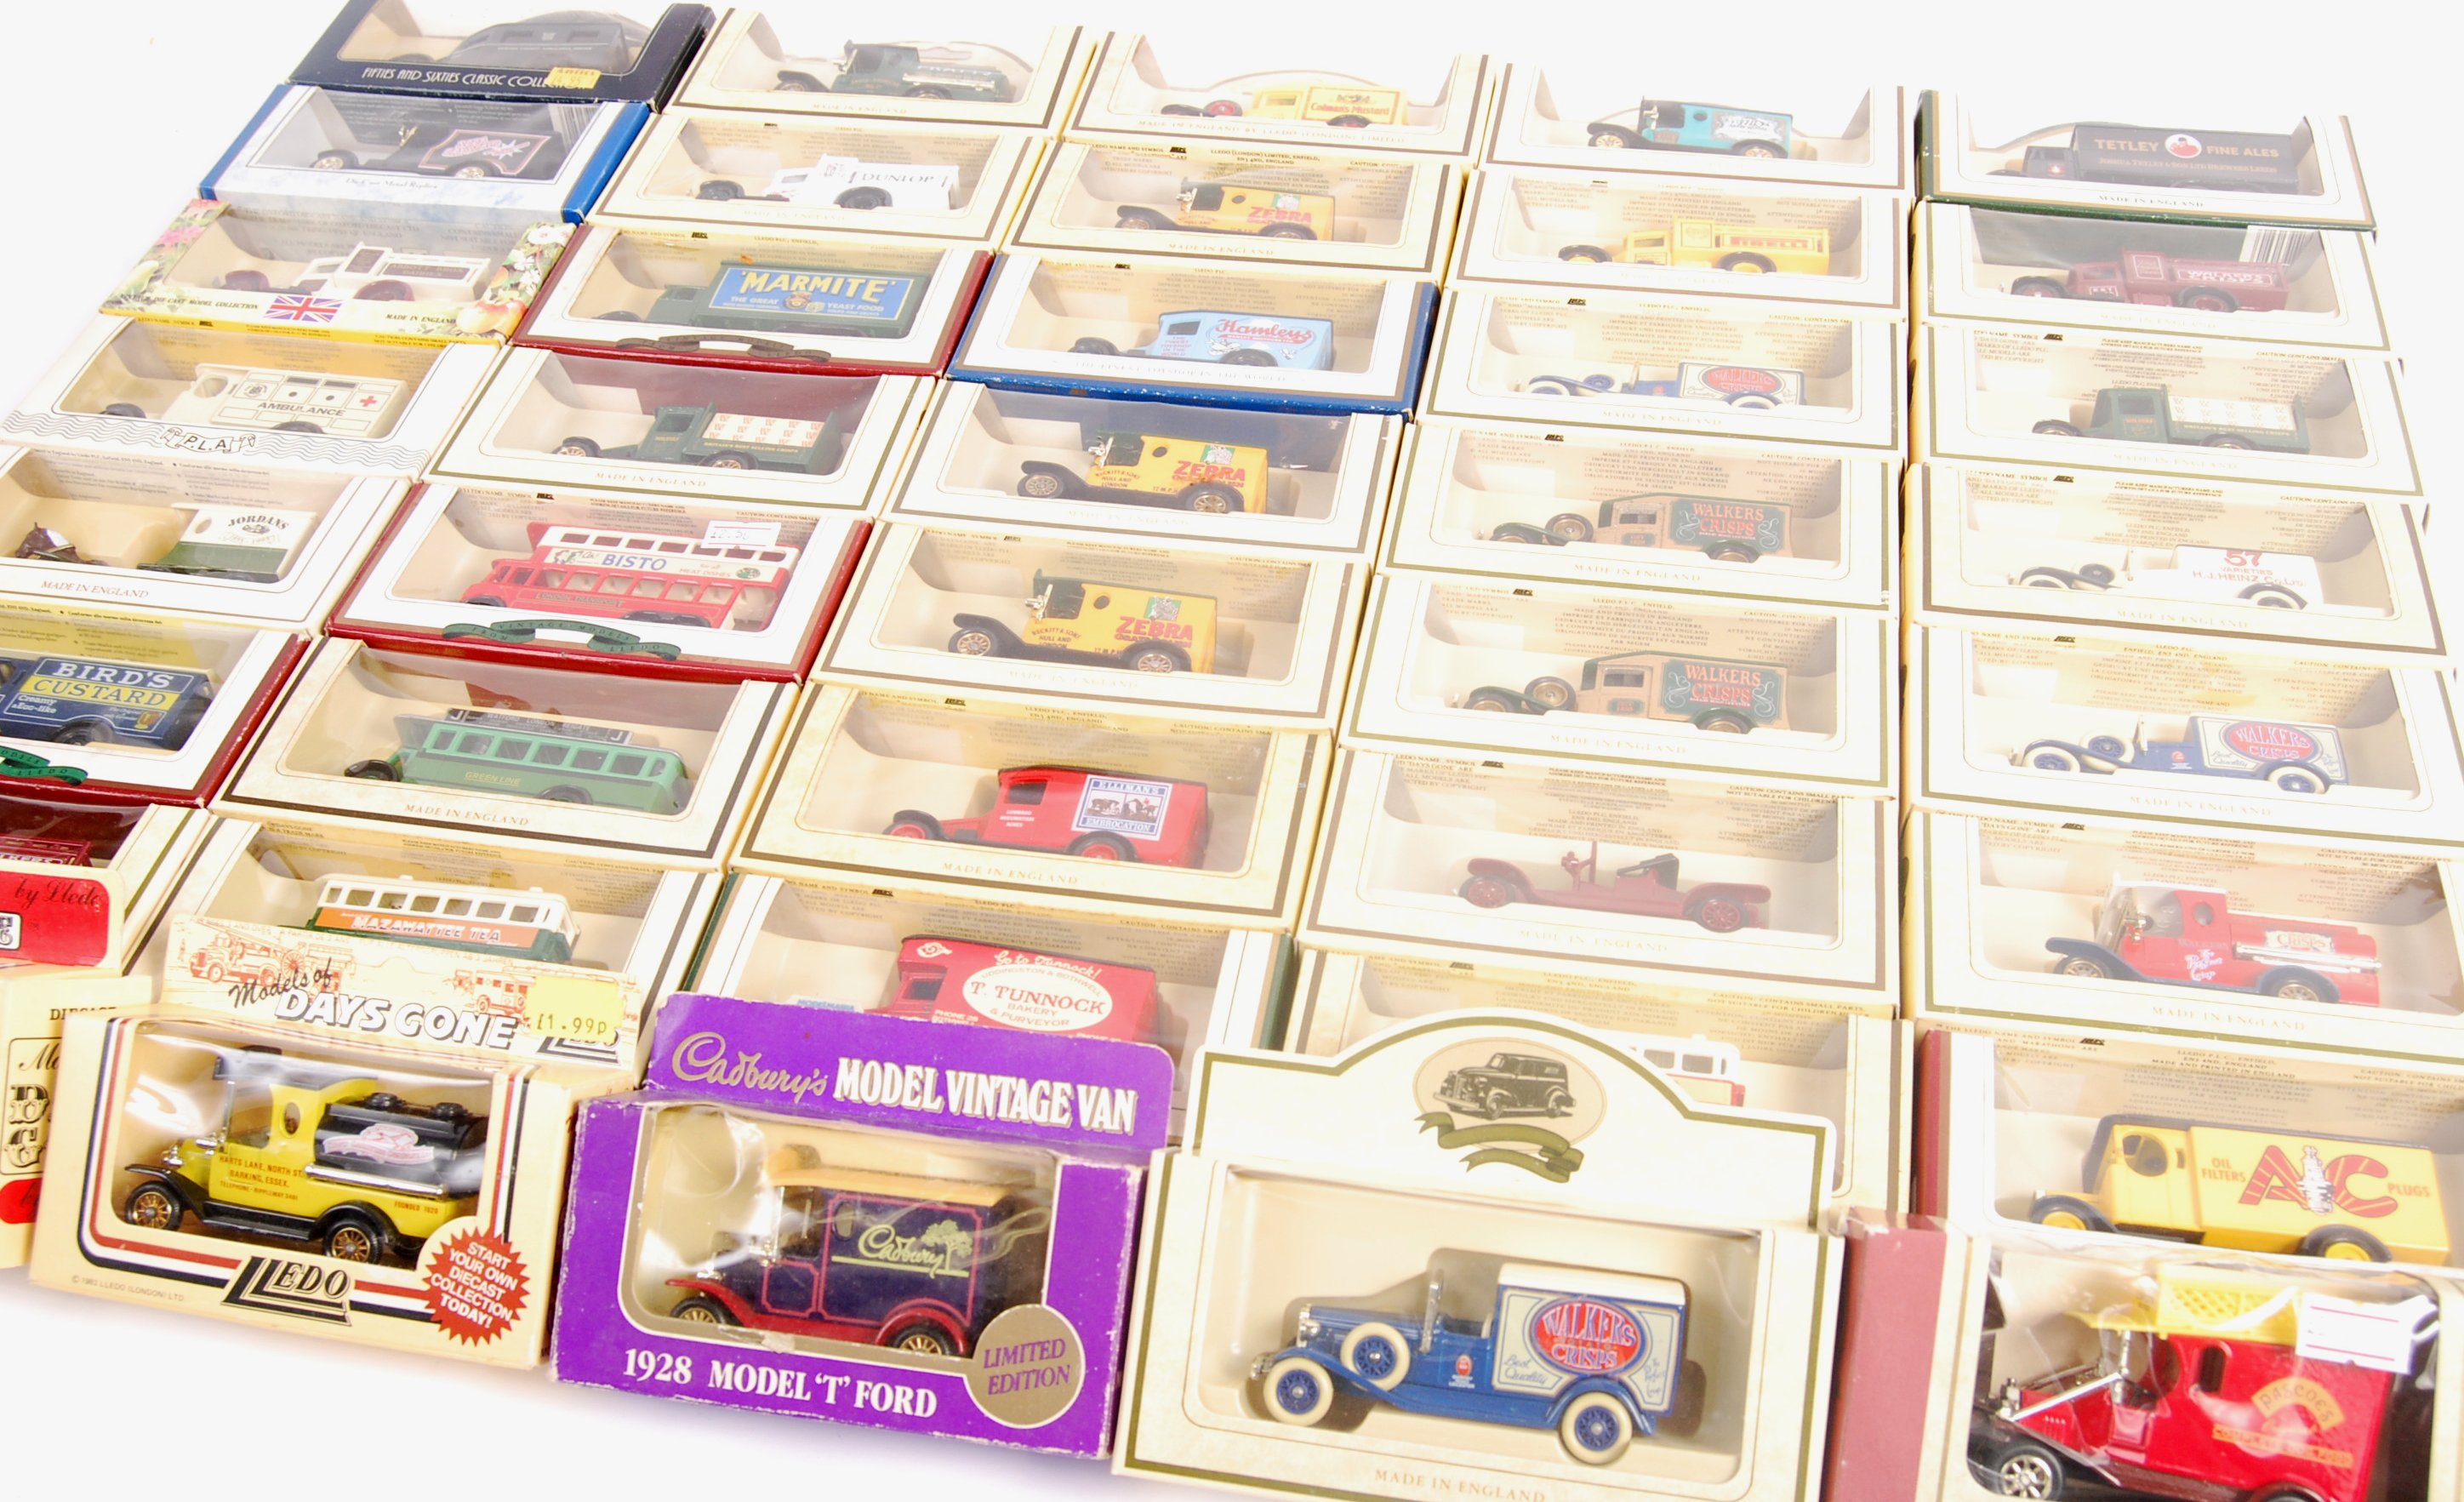 COLLECTION OF LLEDO DAYS GONE BOXED DIECAST MODELS - Image 2 of 3